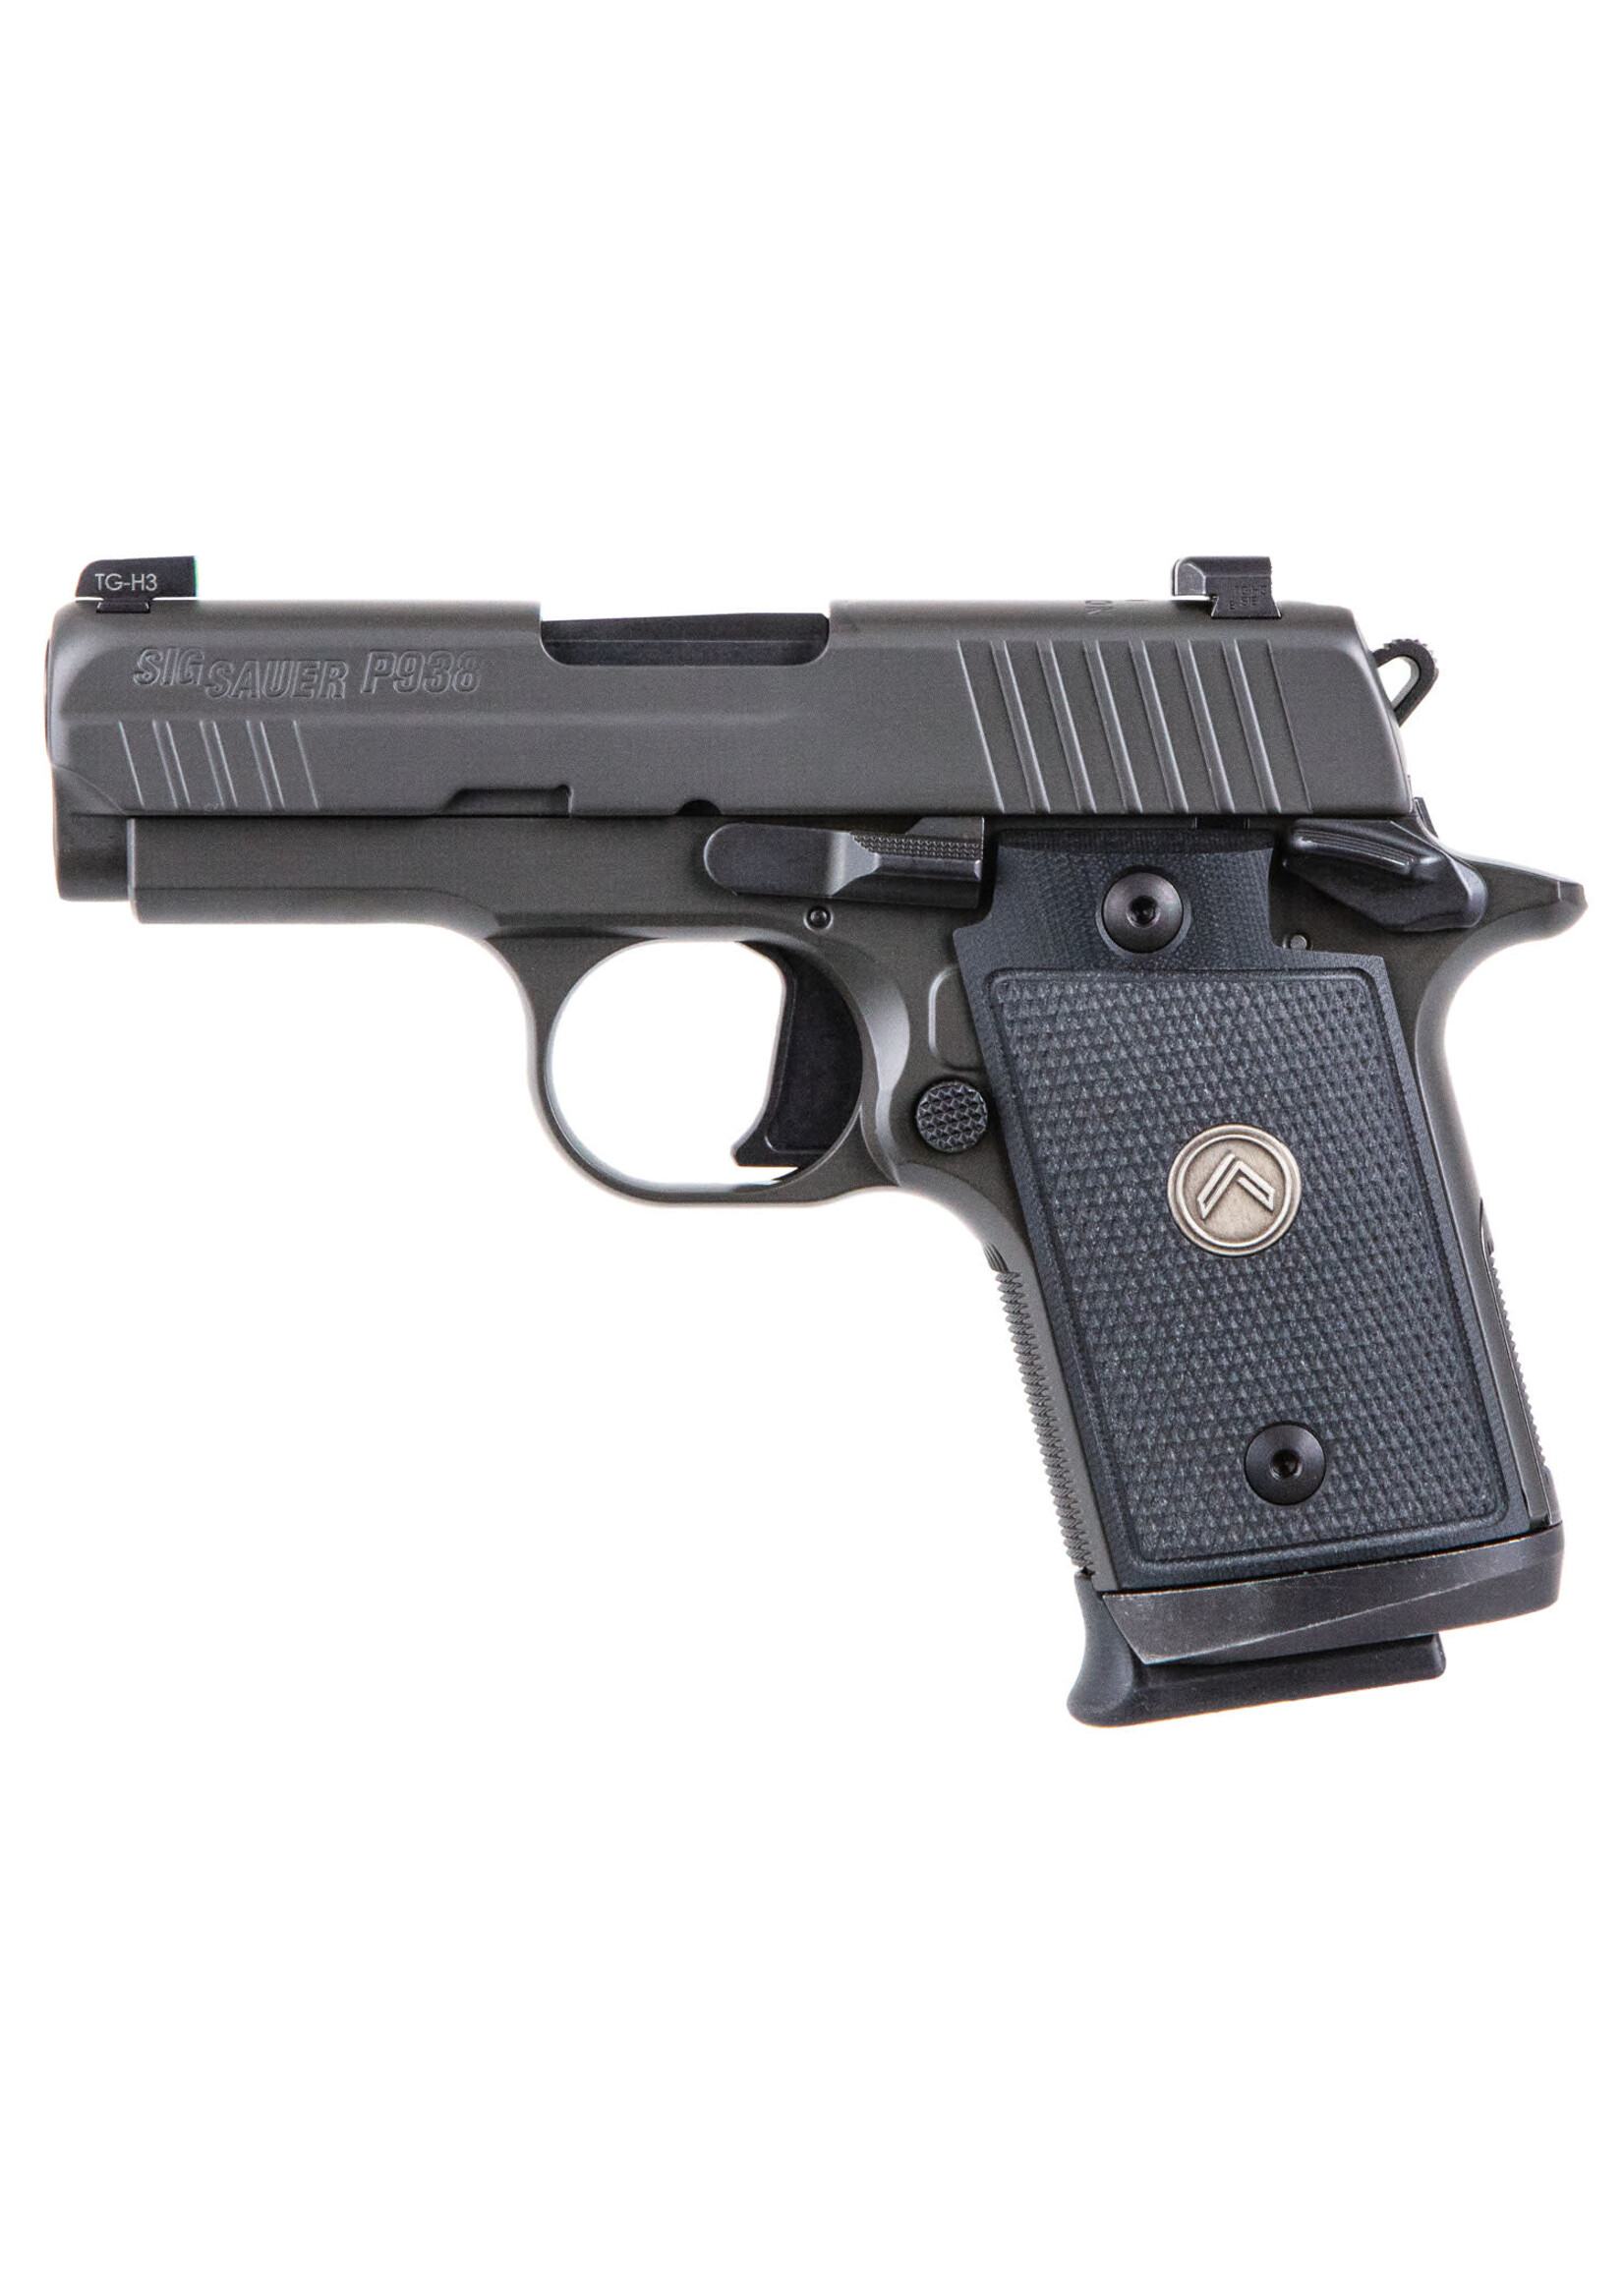 Sig Sauer Sig Sauer 9389LEGION P938 Micro-Compact Legion 9mm Luger Caliber with 3" Barrel, 7+1 Capacity, Overall Legion Gray Cerakote Metal Finish, Beavertail Frame, Serrated Slide & Black G10 Grip Includes 3 Mags